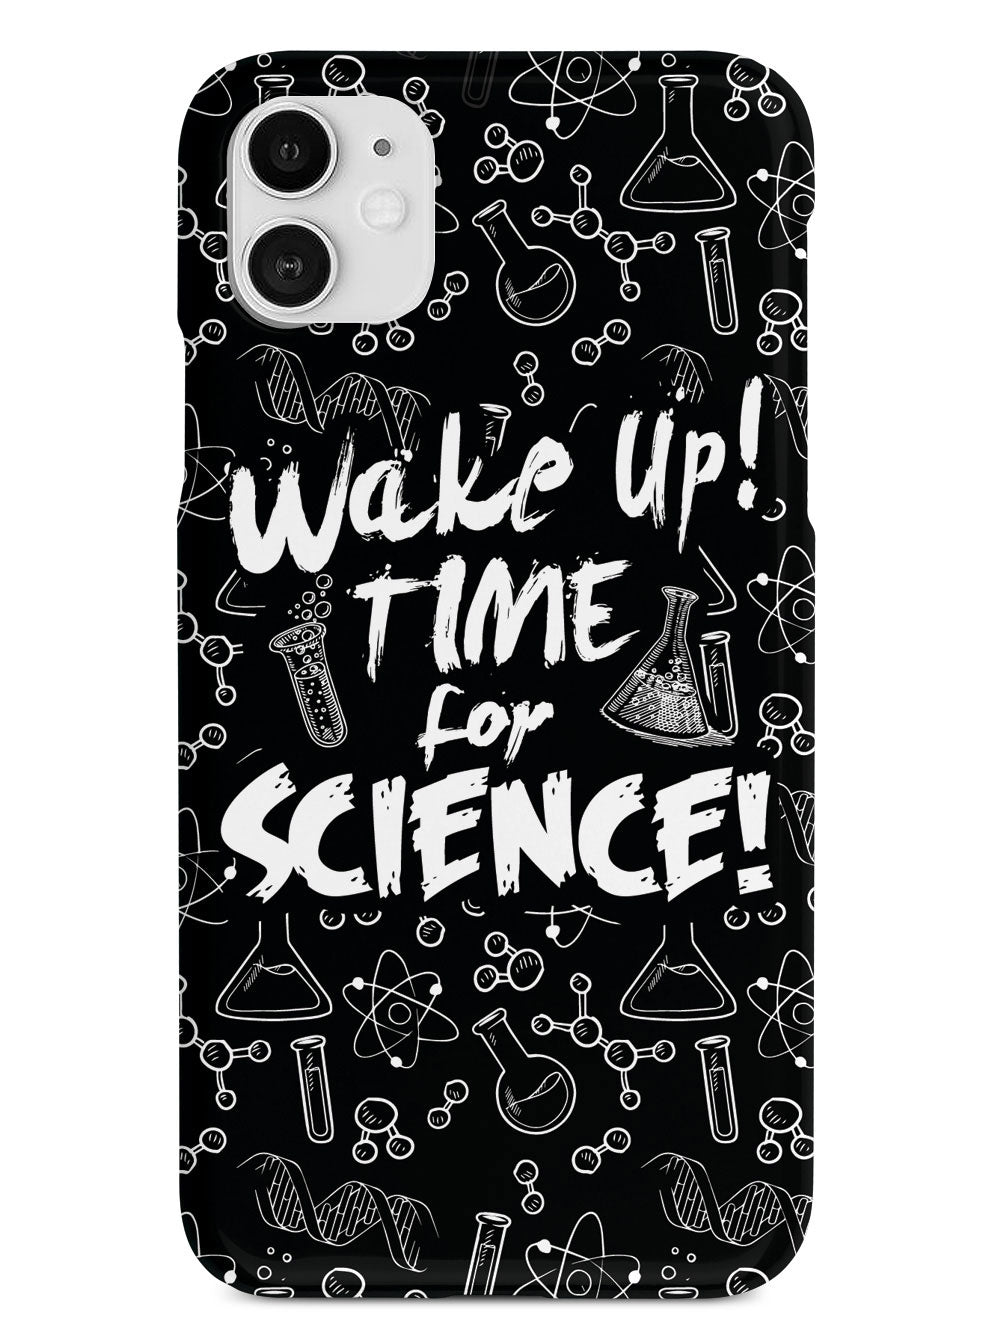 WAKE UP! Time For Science! - Black Case